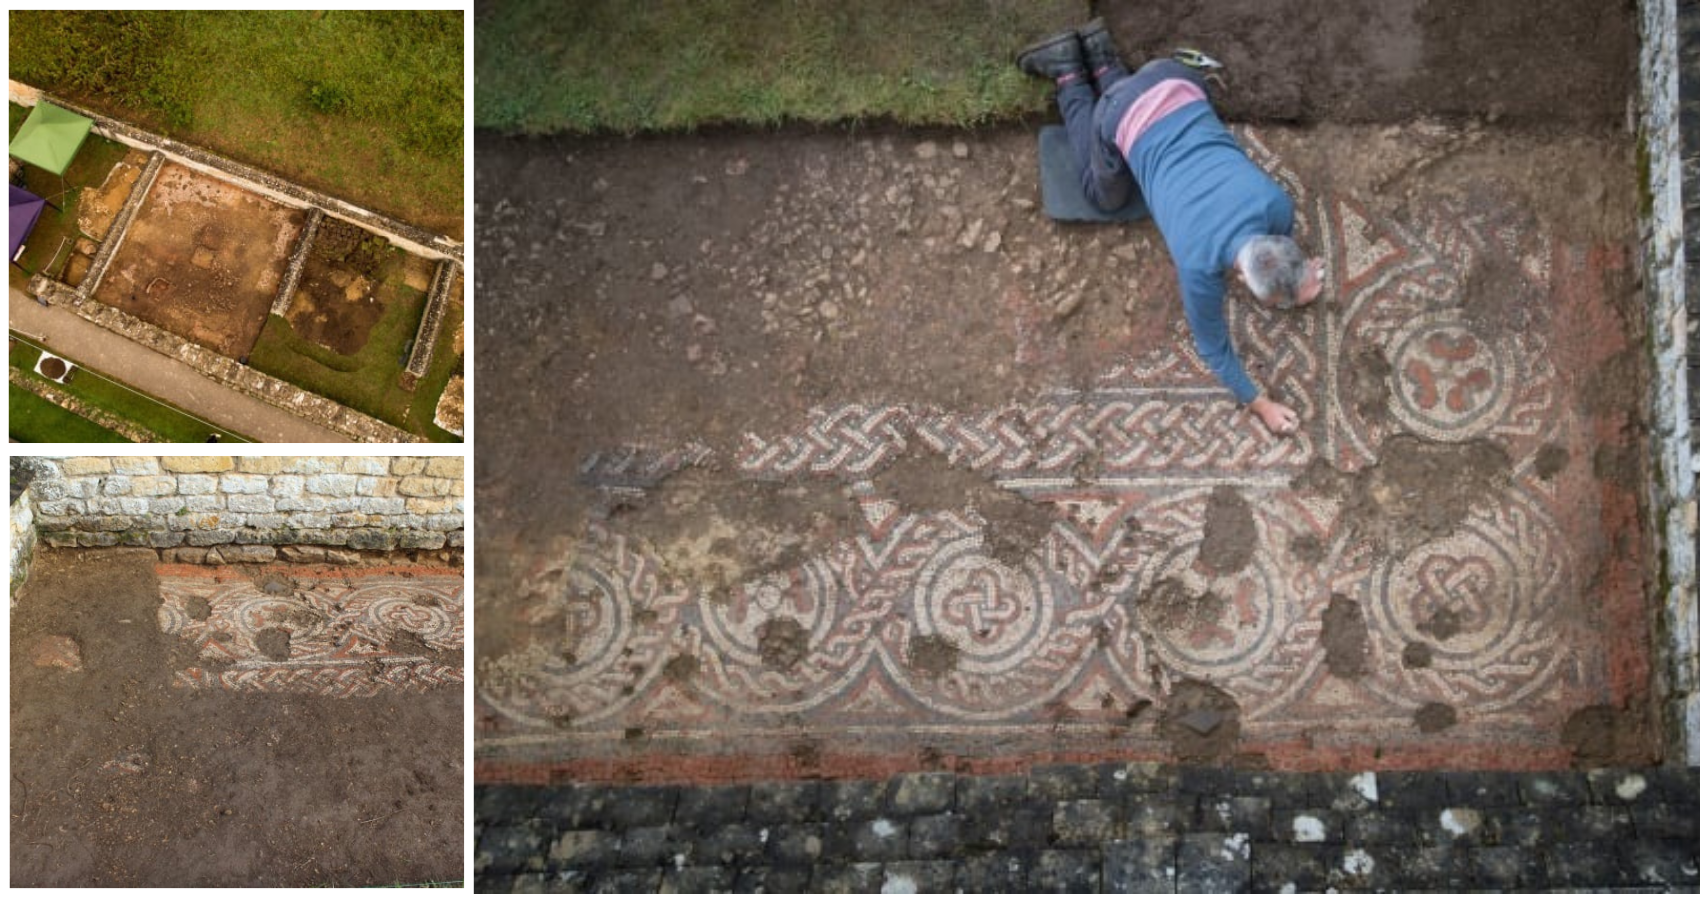 ‘Tremendously exciting’ 5th century Roman mosaic found in Britain